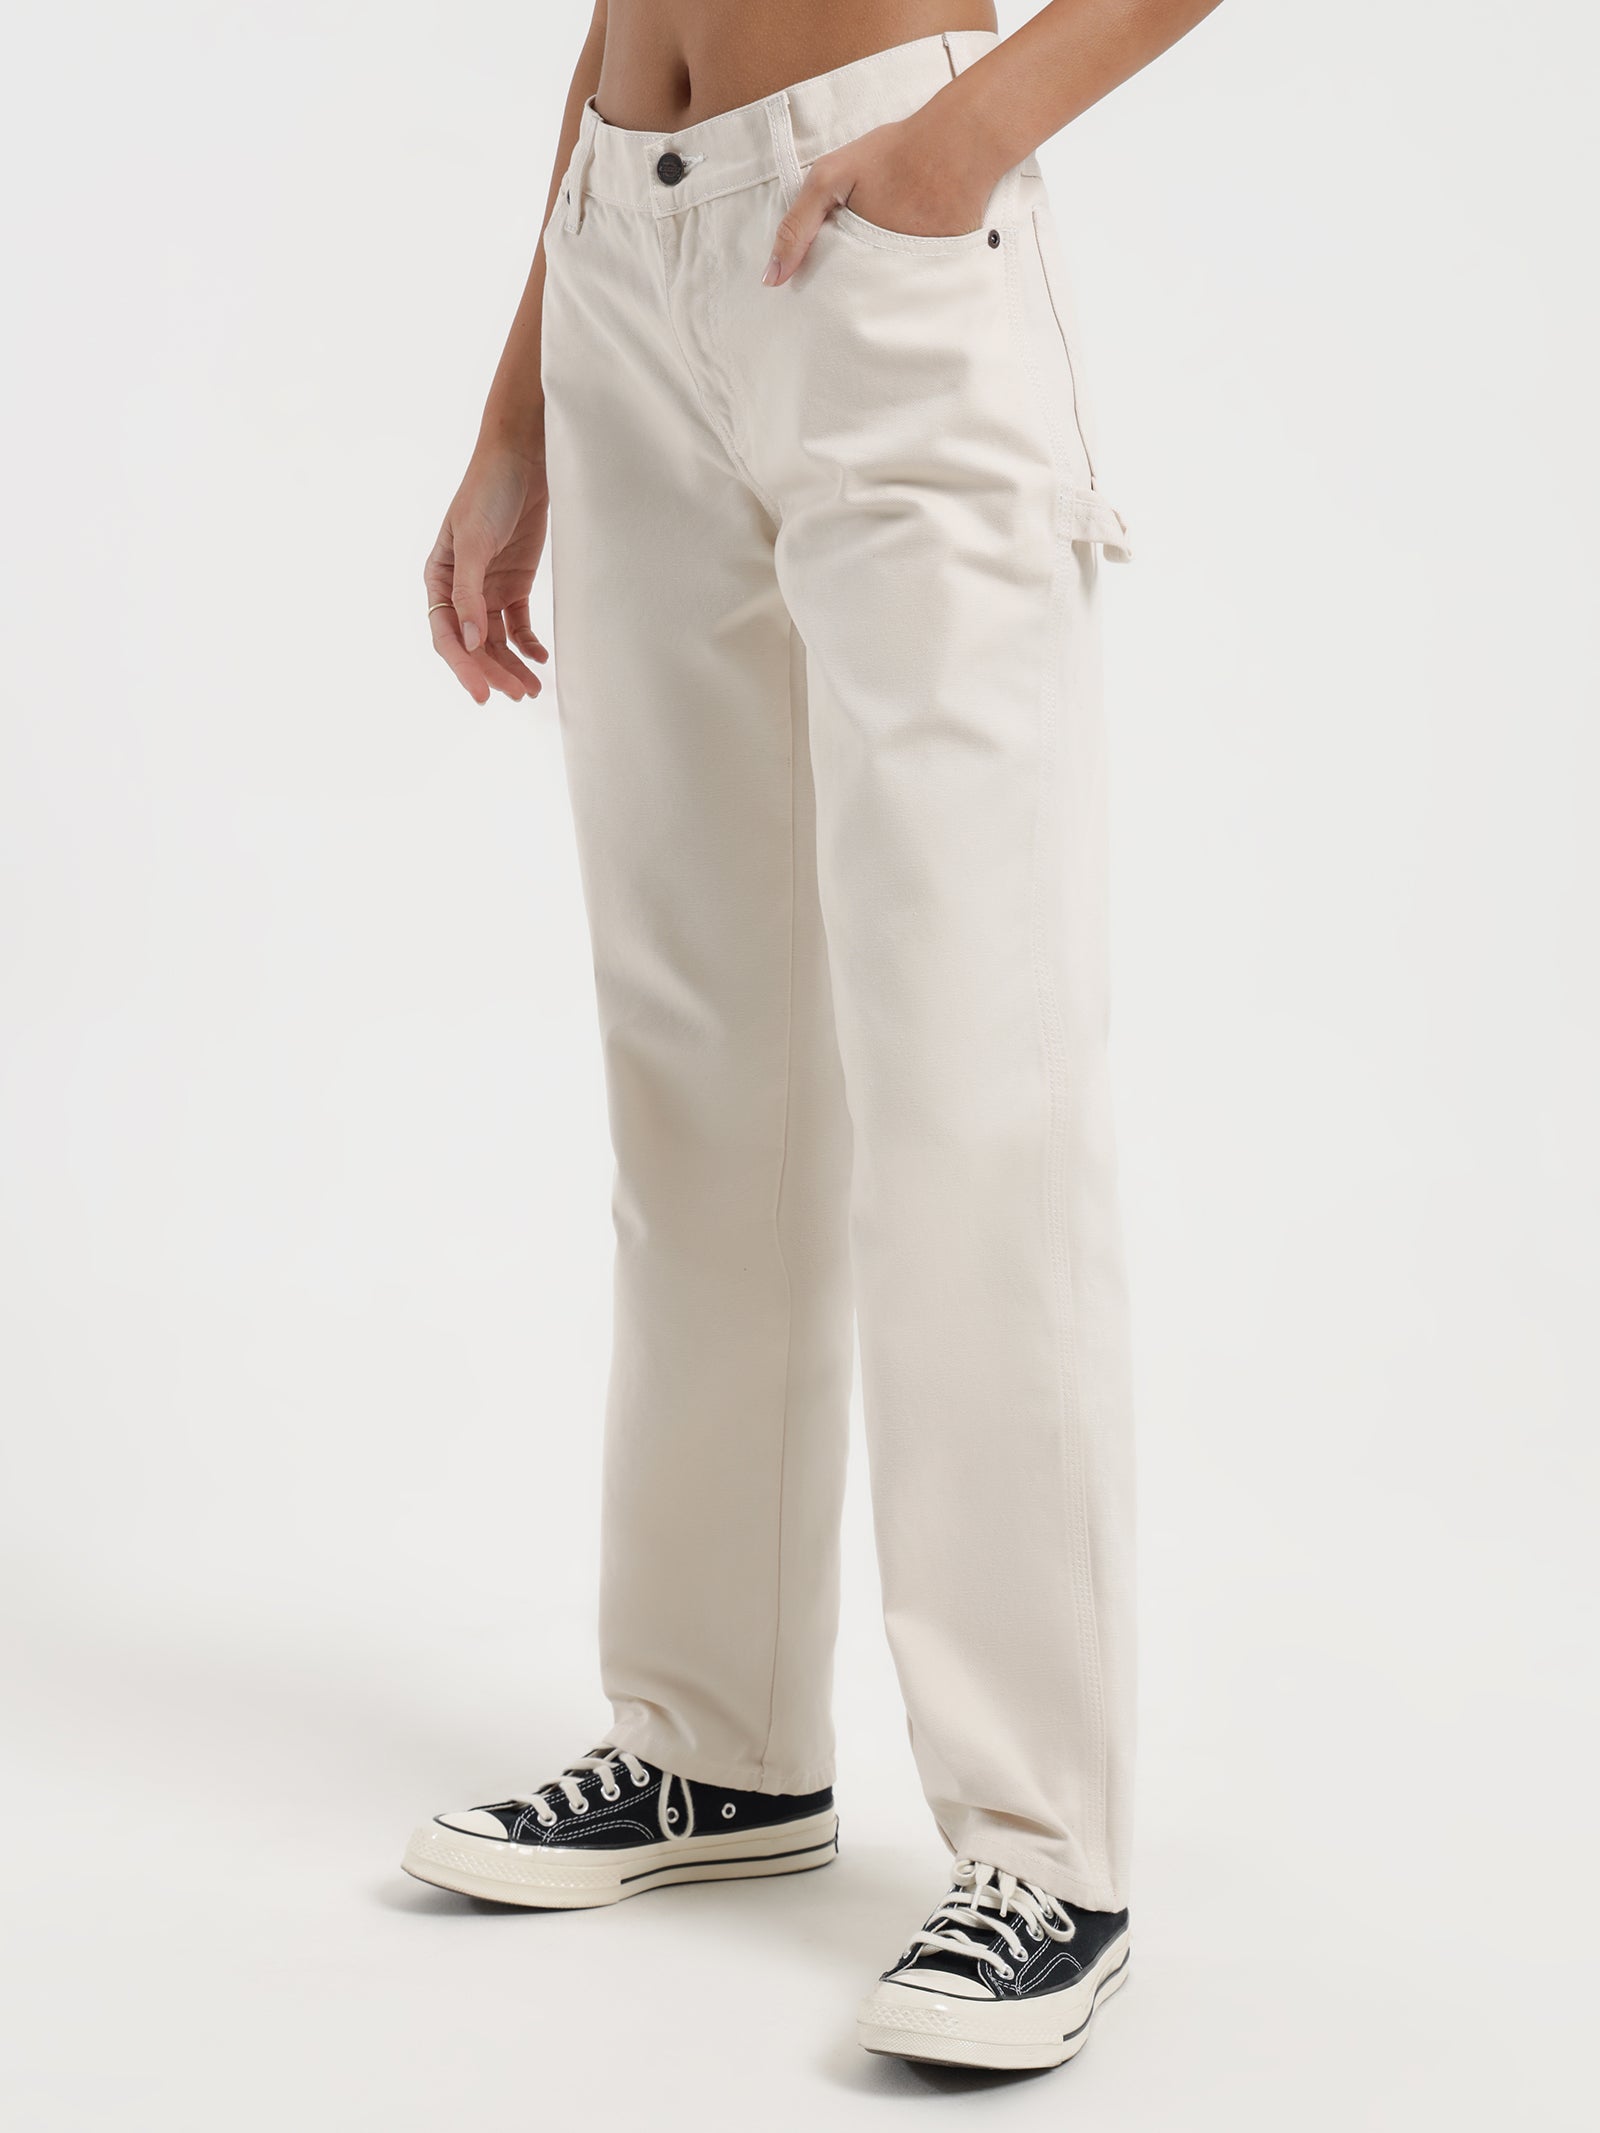 Contrast Low Rider Chinos in Bone